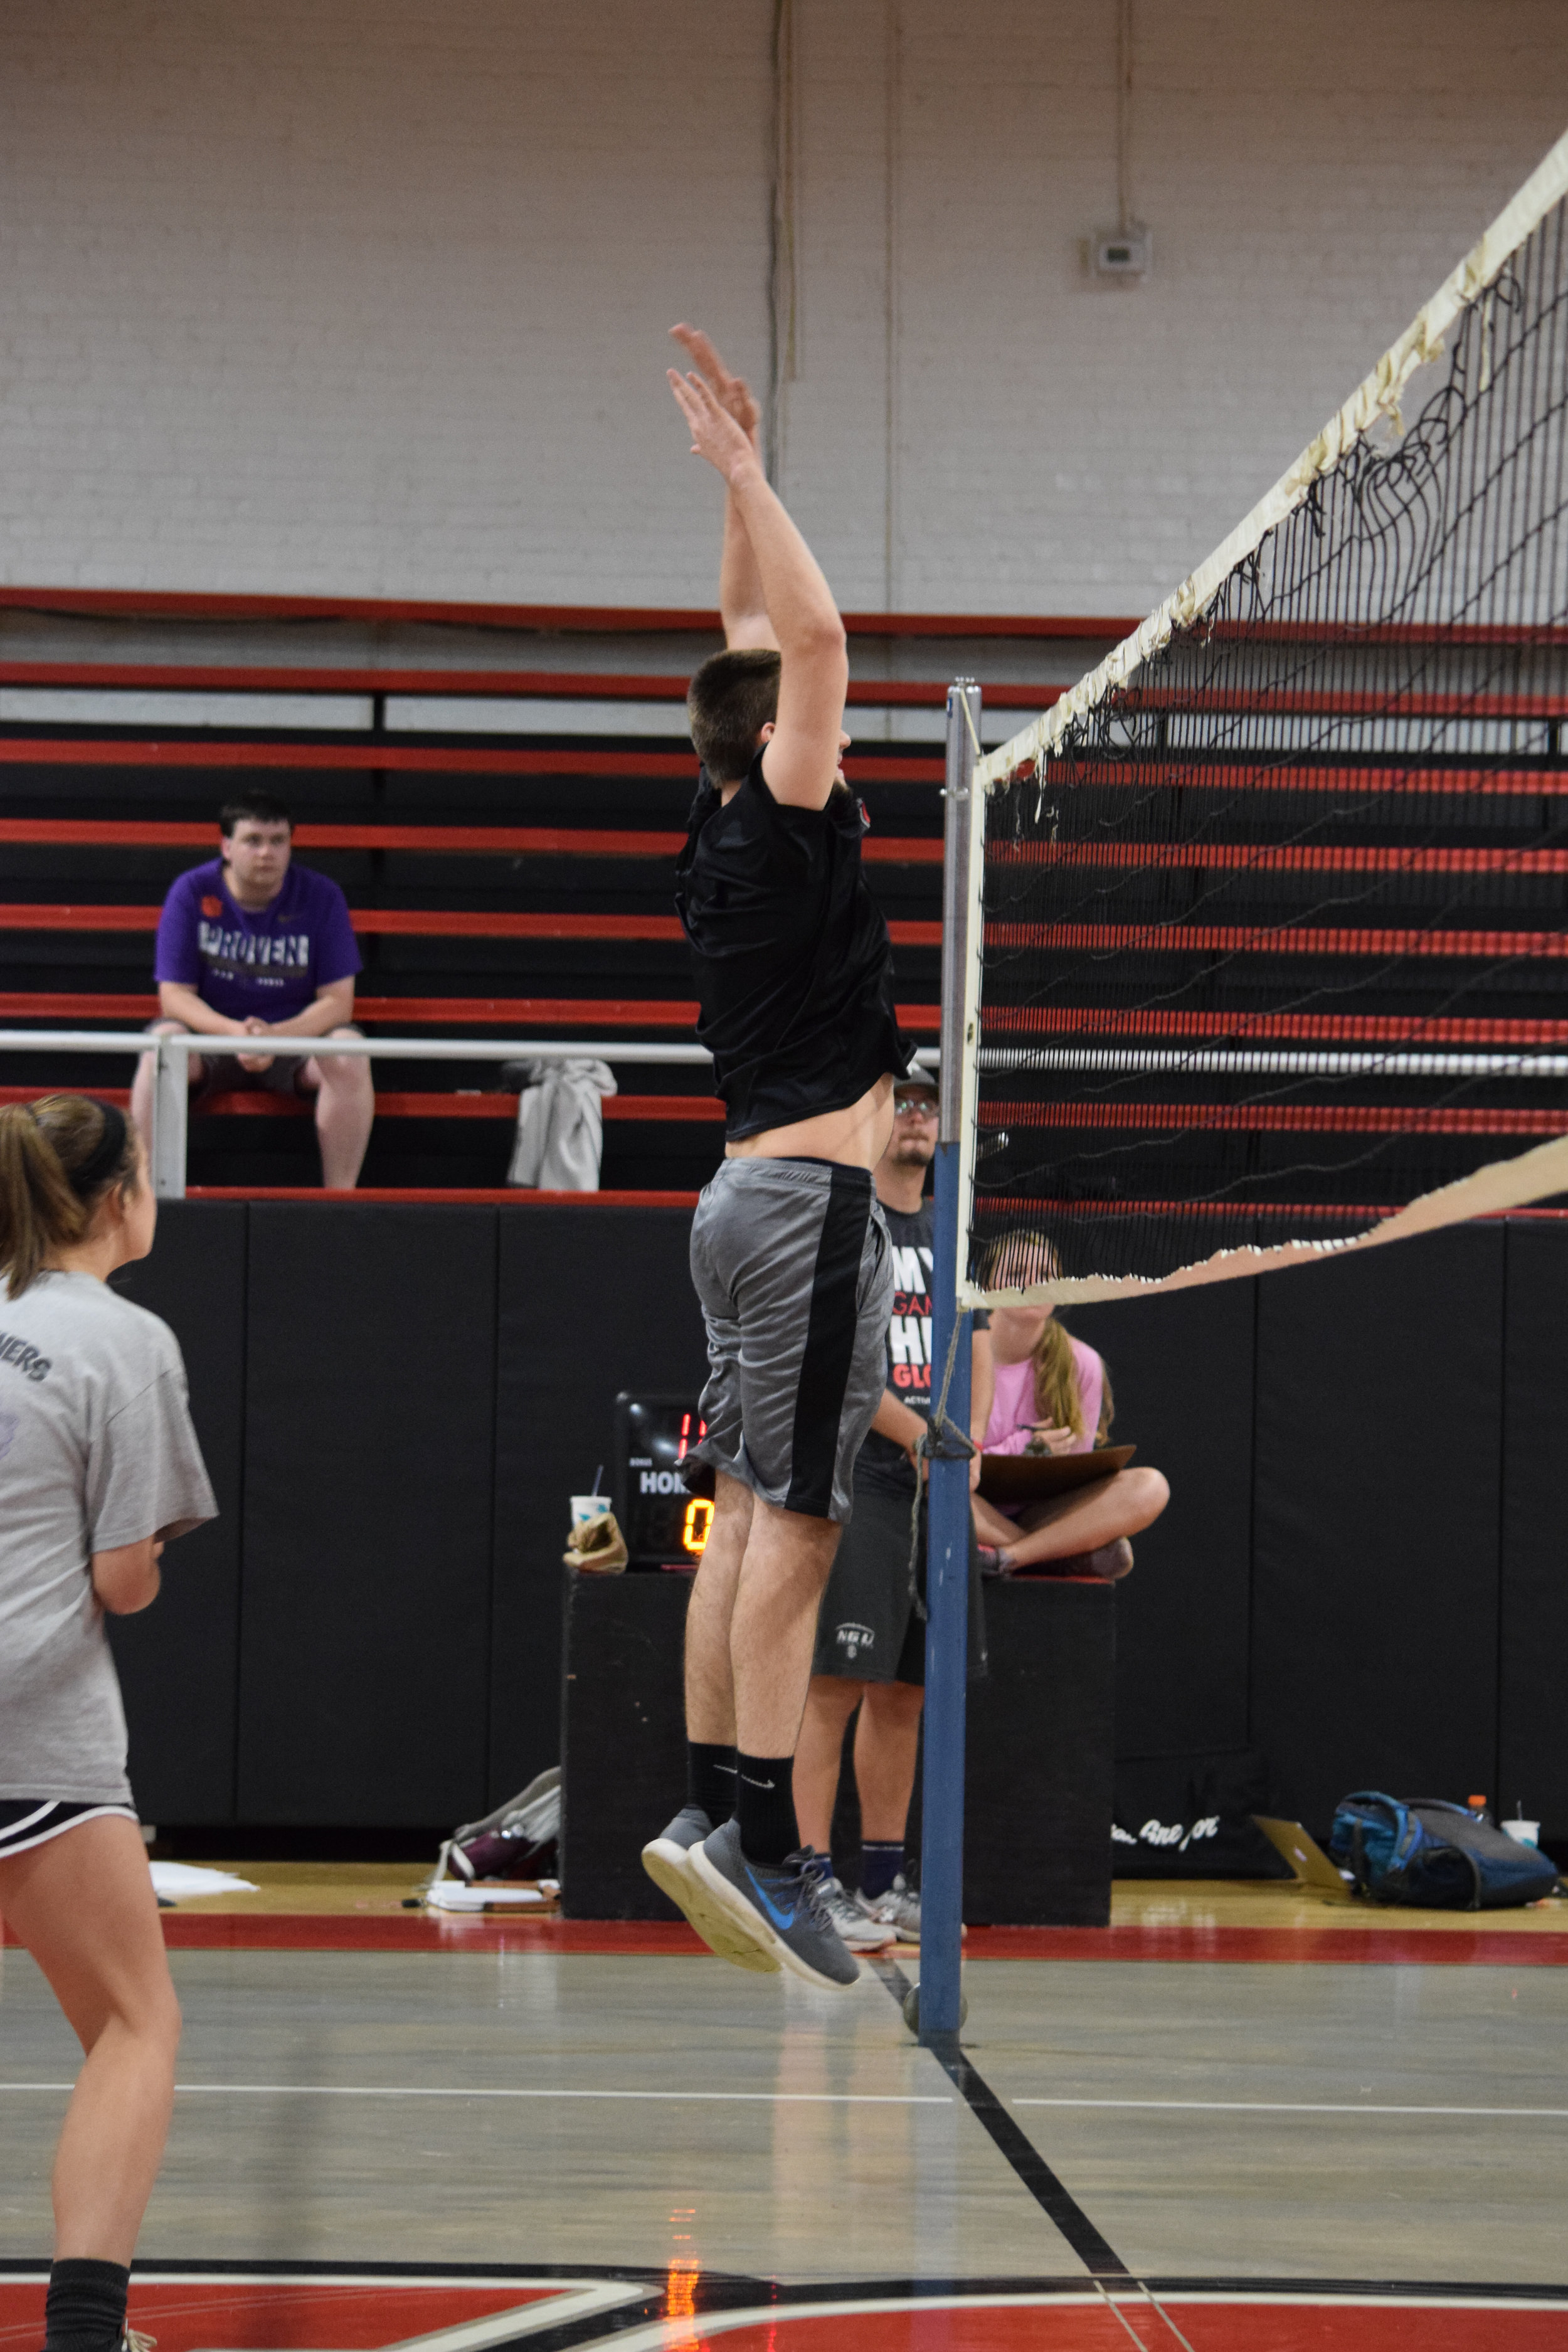 Murray jumps to block a spike.